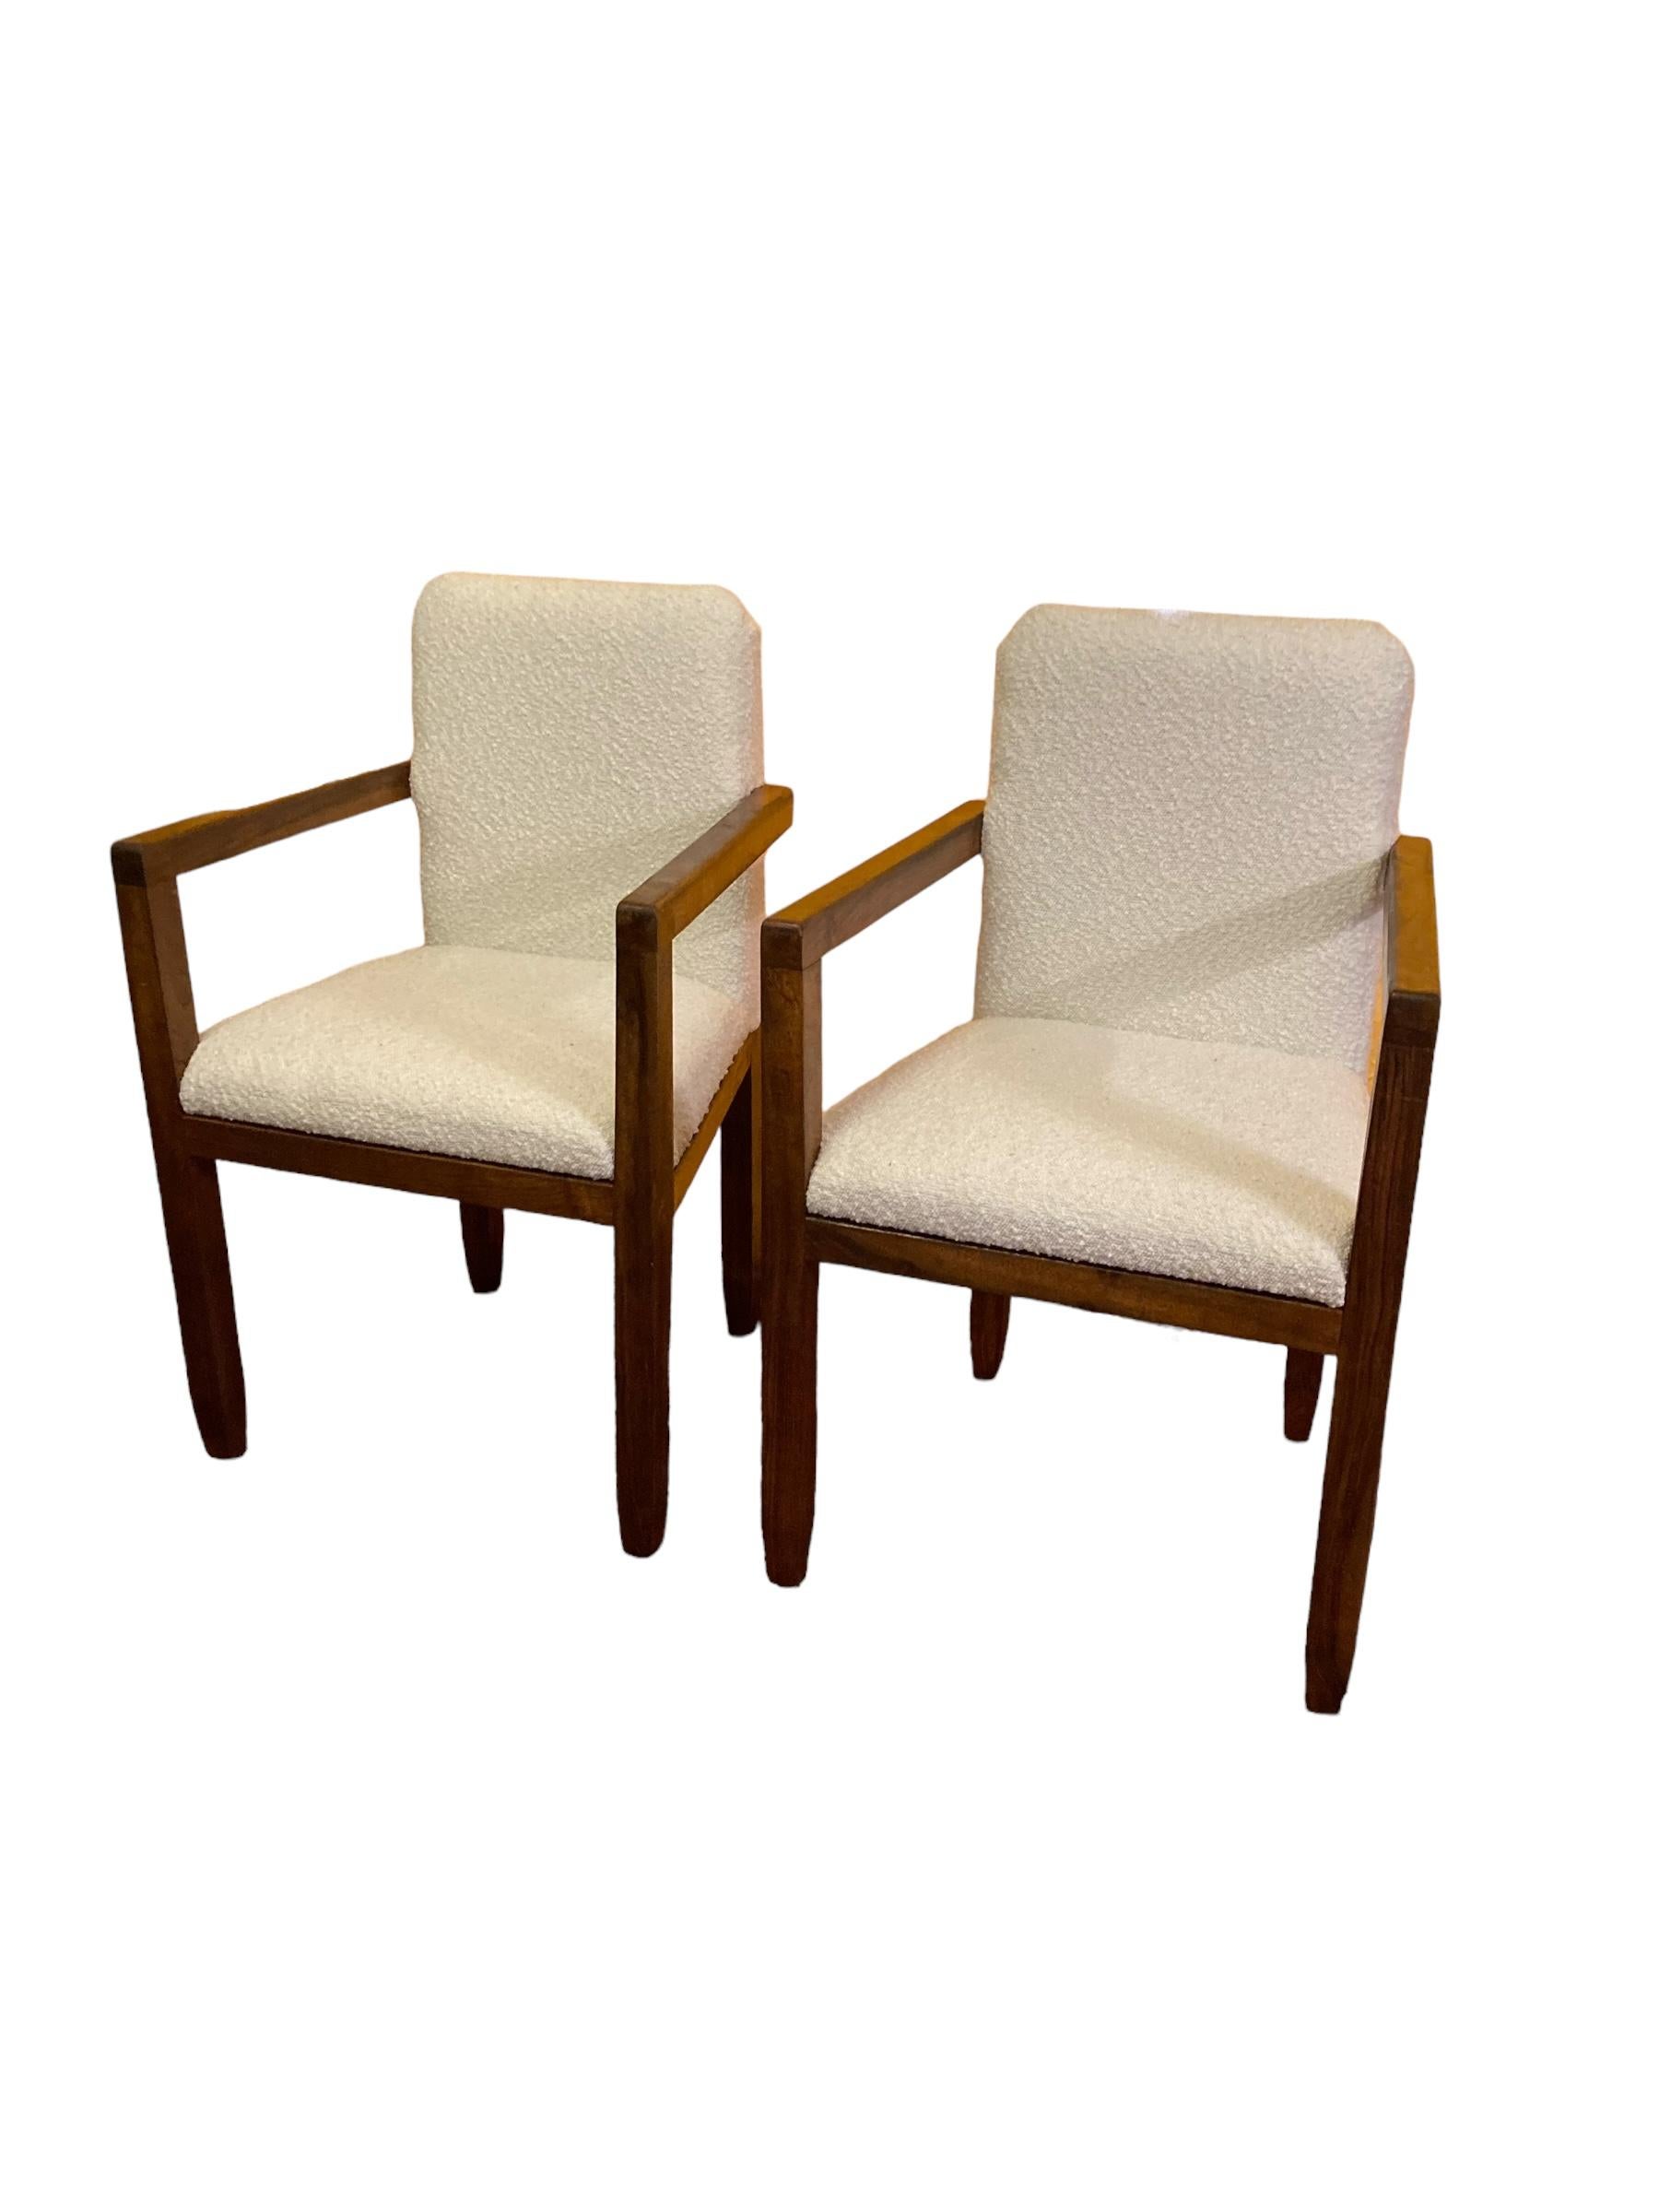 A Pair of Art Deco Mahogany framed Armchairs, White Boucle Upholstery 1920's. Hand made and solid construction. These chairs are both rare and unusual.  They show a completely unique design that fits in to any style of interior design. Art Deco